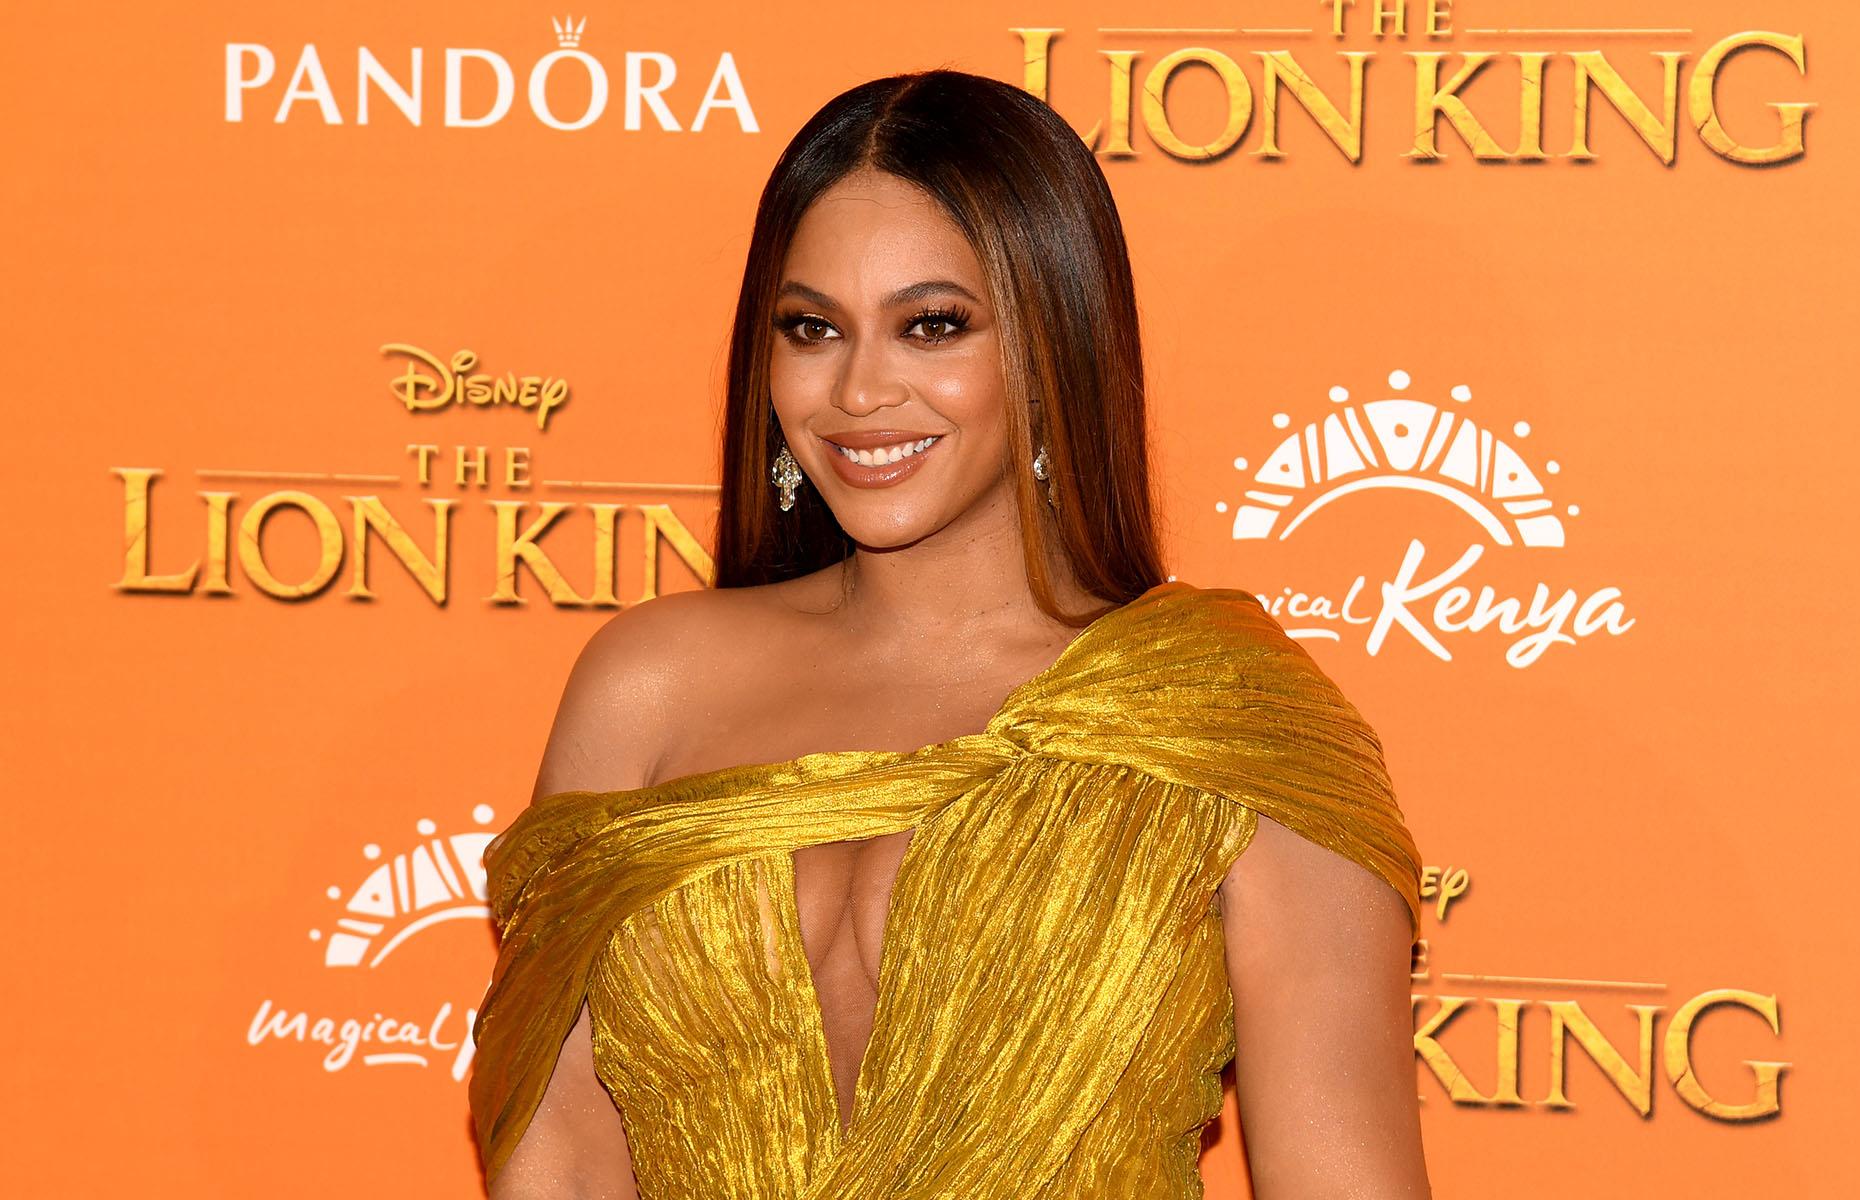 <p>Music aside, the multi-talented Beyoncé has also found success on the screen.</p>  <p>She reportedly earned $12.5 million for her role in the 2006 movie <em>Dreamgirls</em>, plus a further $1 million for her work on the soundtrack. Meanwhile, in 2019, Beyonce voiced Nala in Disney’s <em>The Lion King </em>remake, raking in a cool $25 million for her efforts.</p>  <p>And remember her 2002 performance as Foxxy Cleopatra in <em>Austin Powers in Goldmember</em>? Groovy, baby.  </p>